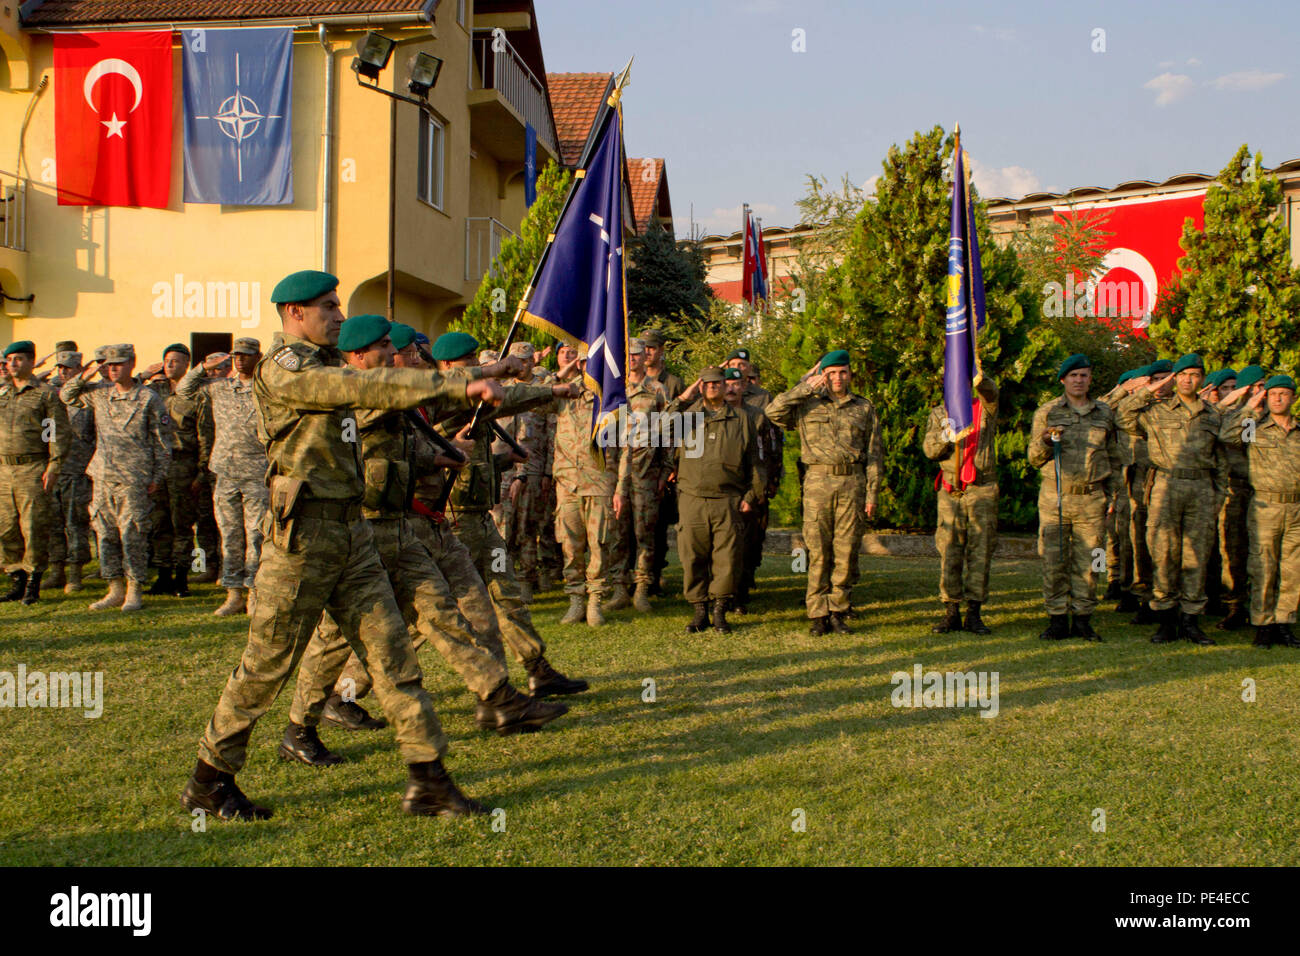 Turkish Soldiers march down a parade field during a change of command ceremony for the Turkish National Command Contingent to Kosovo and Joint Regional Detachment-South, Sept. 3, 2015, in Prizren, Kosovo. During the ceremony, Turkish Col. Omer Faruk Demircioglu formally handed command to Col. Saim Bagci. JRD-S and its liaison monitoring teams are part of NATO’s peace support mission in the region, known as Kosovo Force. (U.S. Army photo by Sgt. Erick Yates, Multinational Battle Group-East) Stock Photo